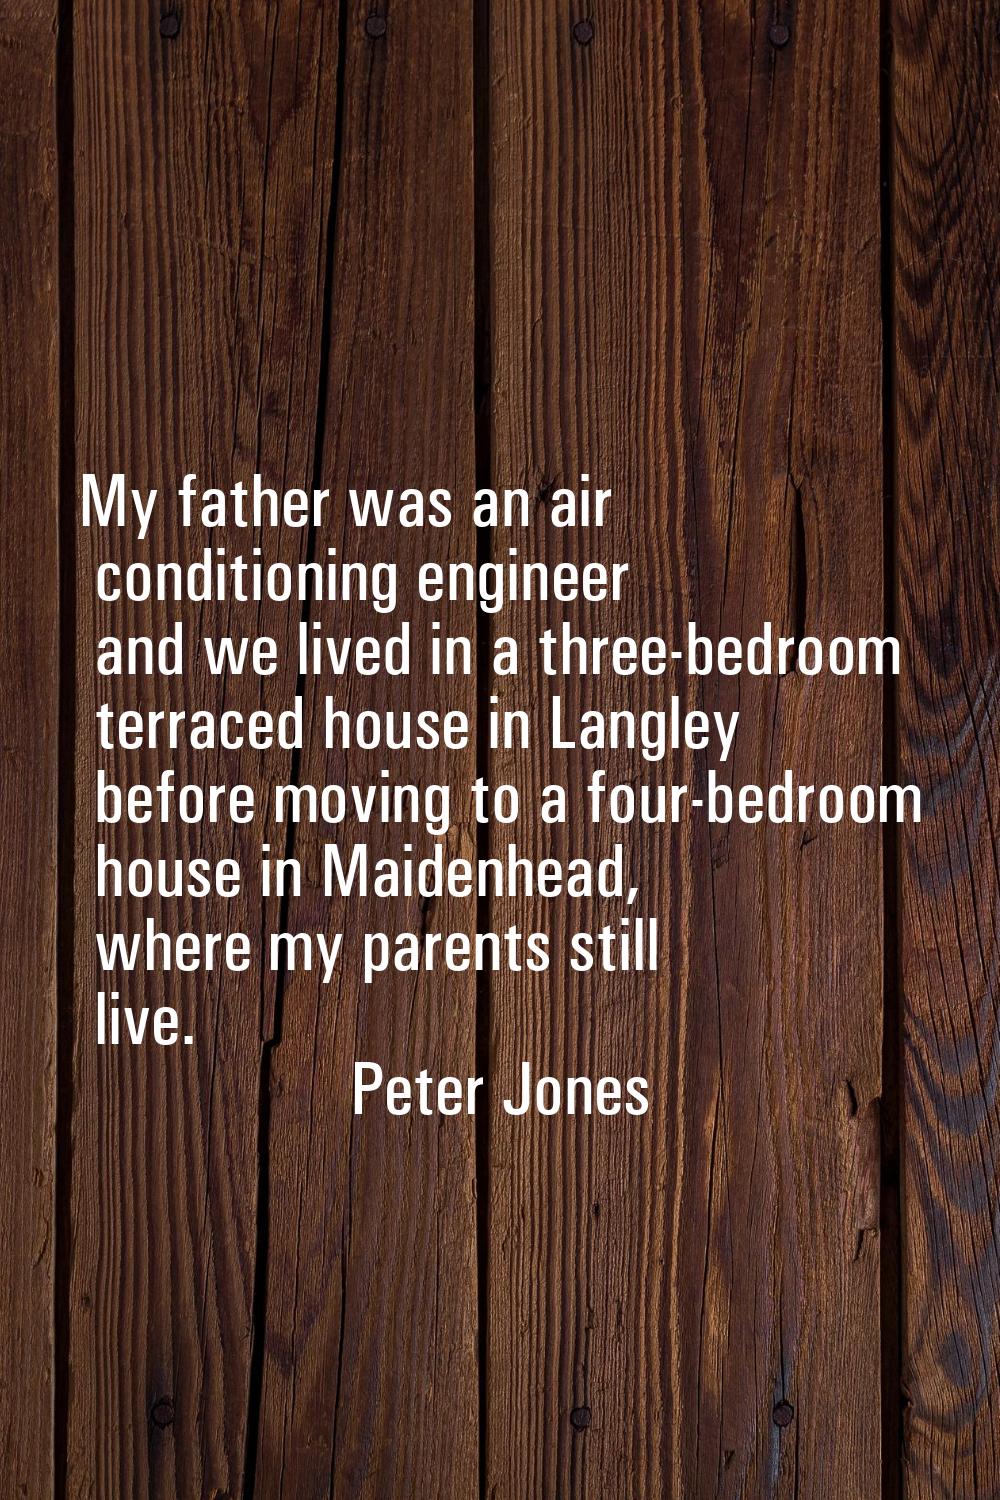 My father was an air conditioning engineer and we lived in a three-bedroom terraced house in Langle